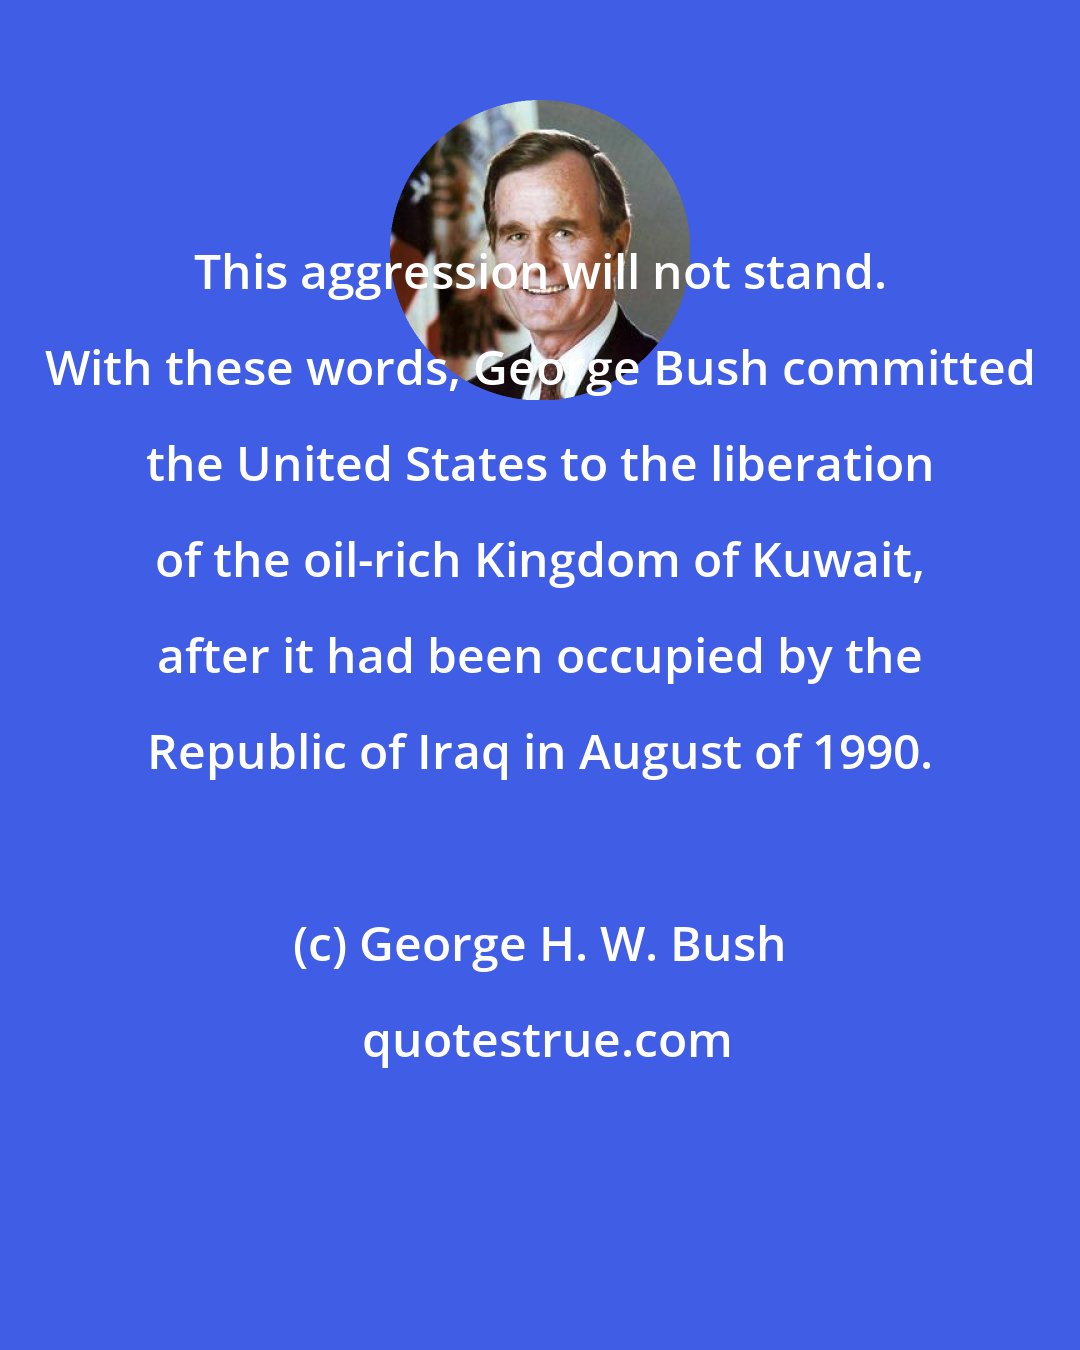 George H. W. Bush: This aggression will not stand. With these words, George Bush committed the United States to the liberation of the oil-rich Kingdom of Kuwait, after it had been occupied by the Republic of Iraq in August of 1990.